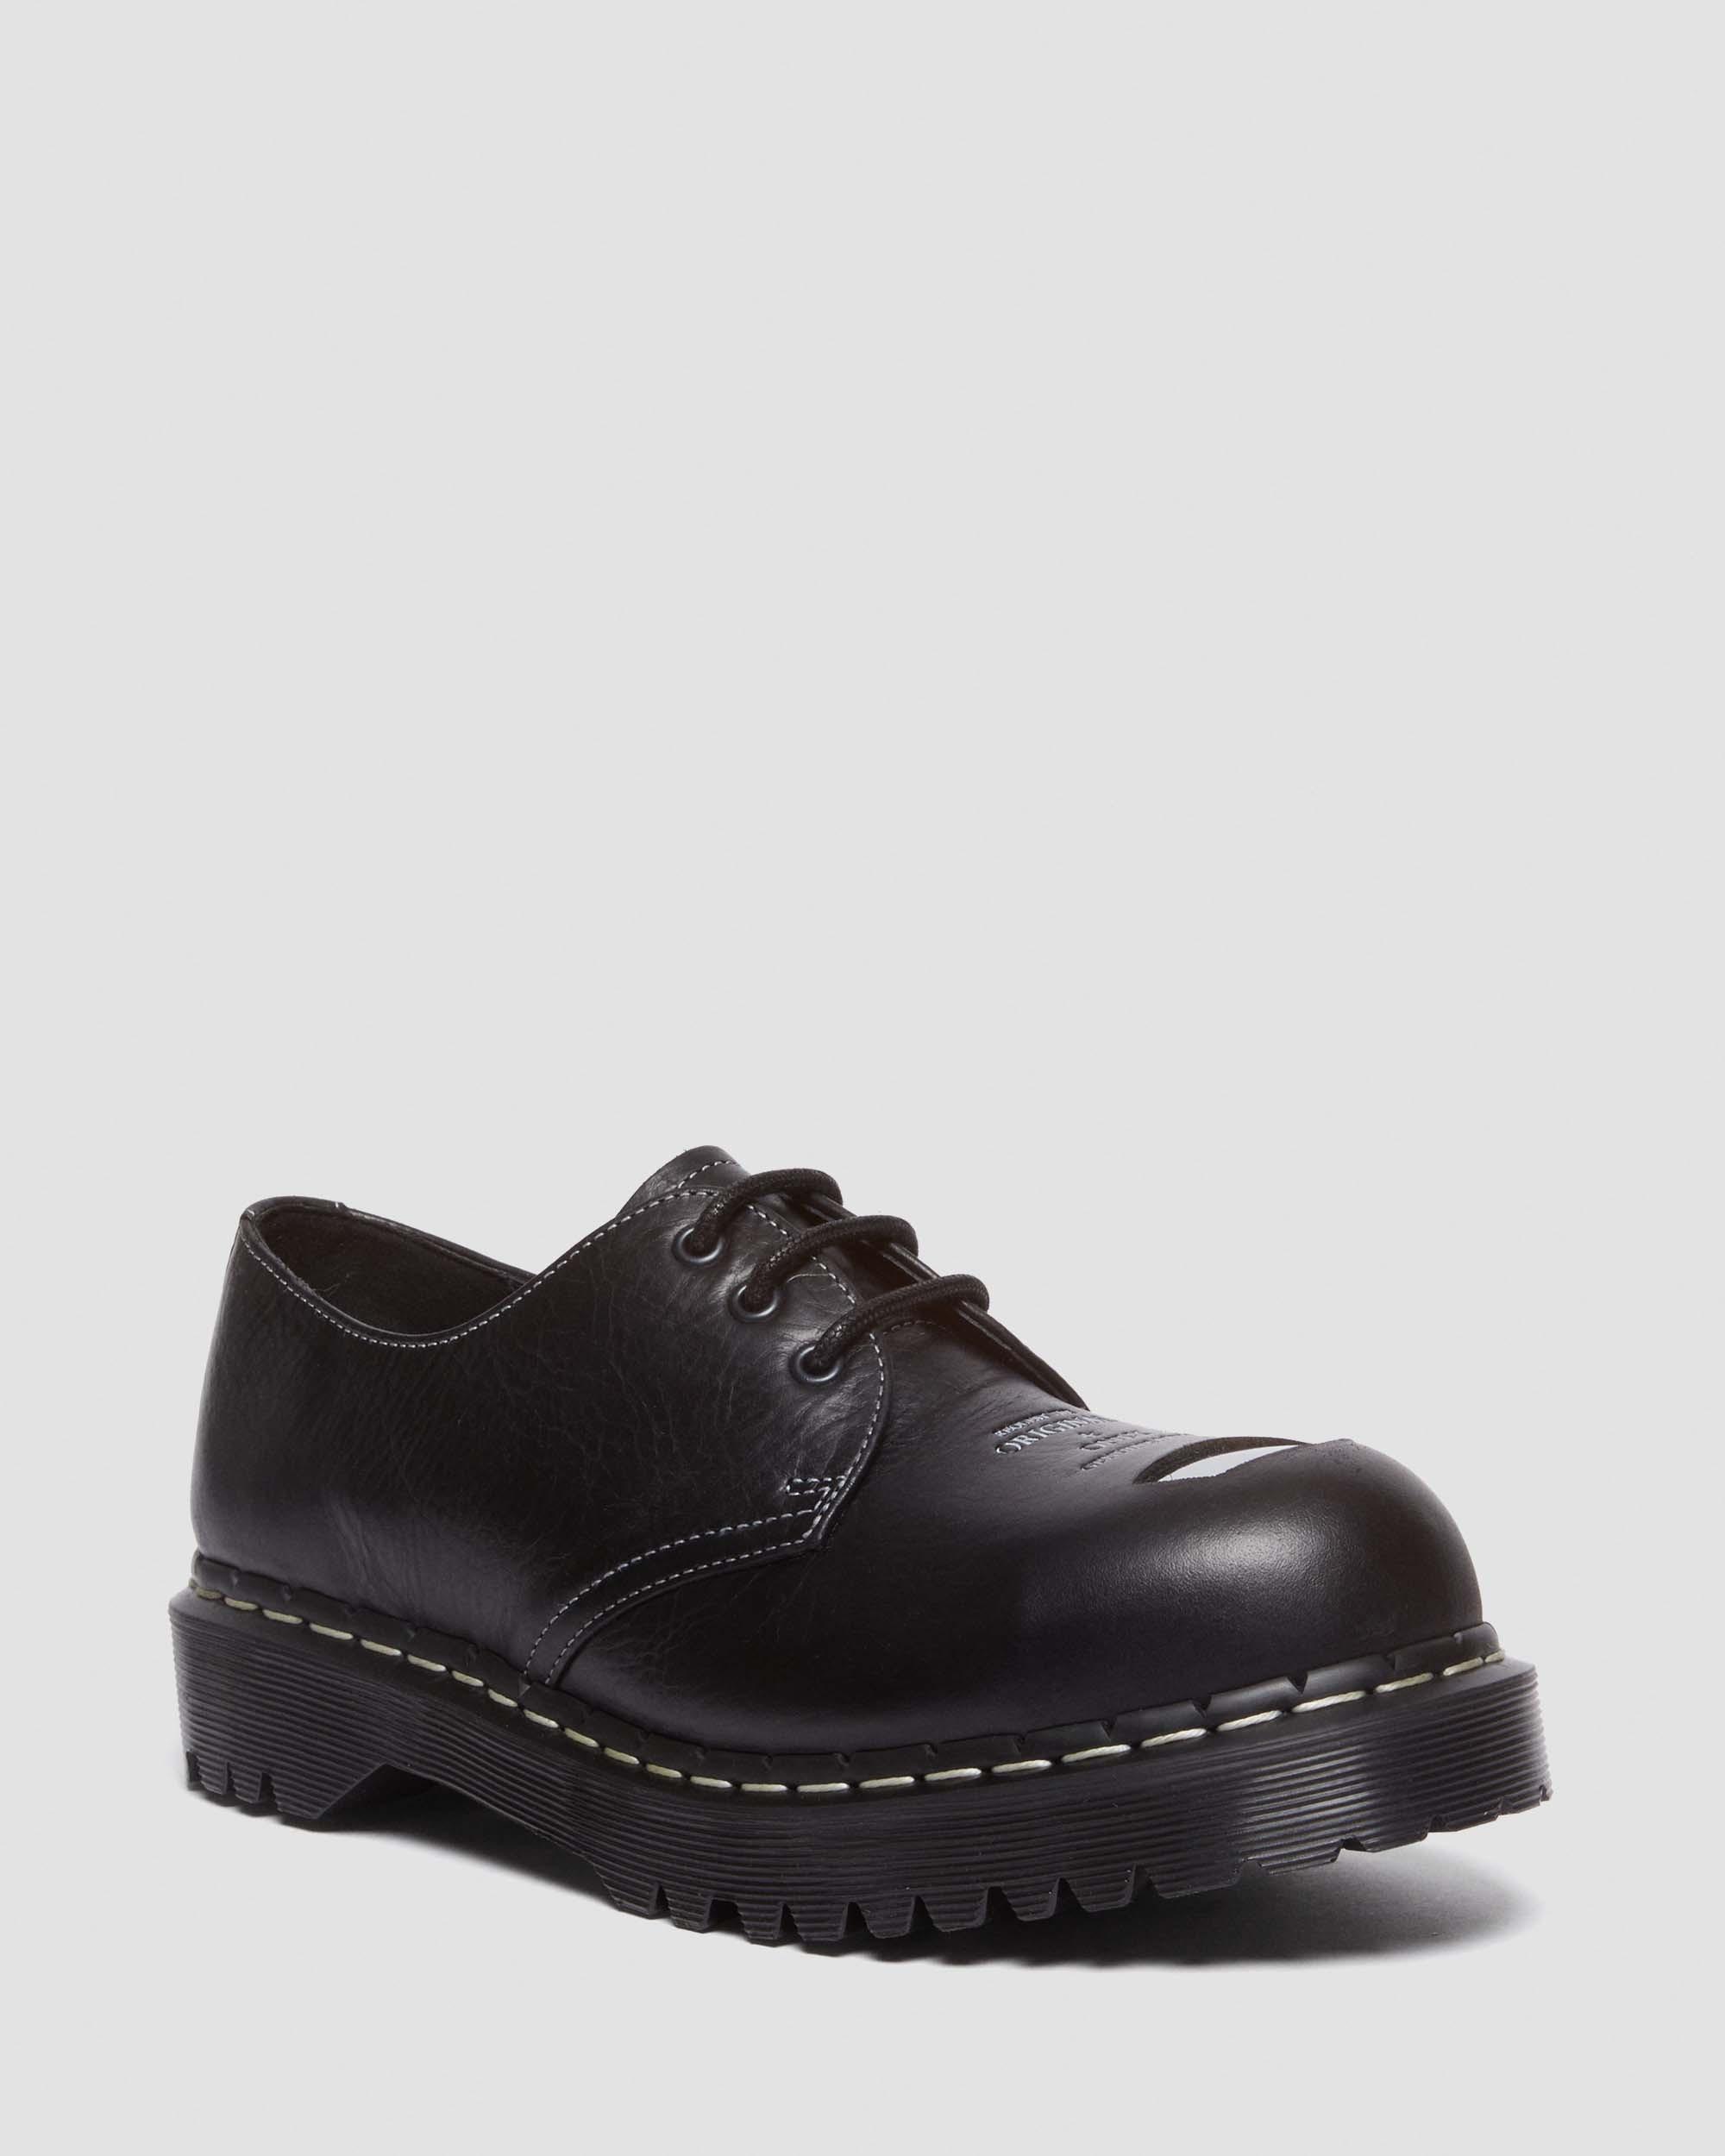 1461 Bex Steel Toe Leather Oxford Shoes in Black